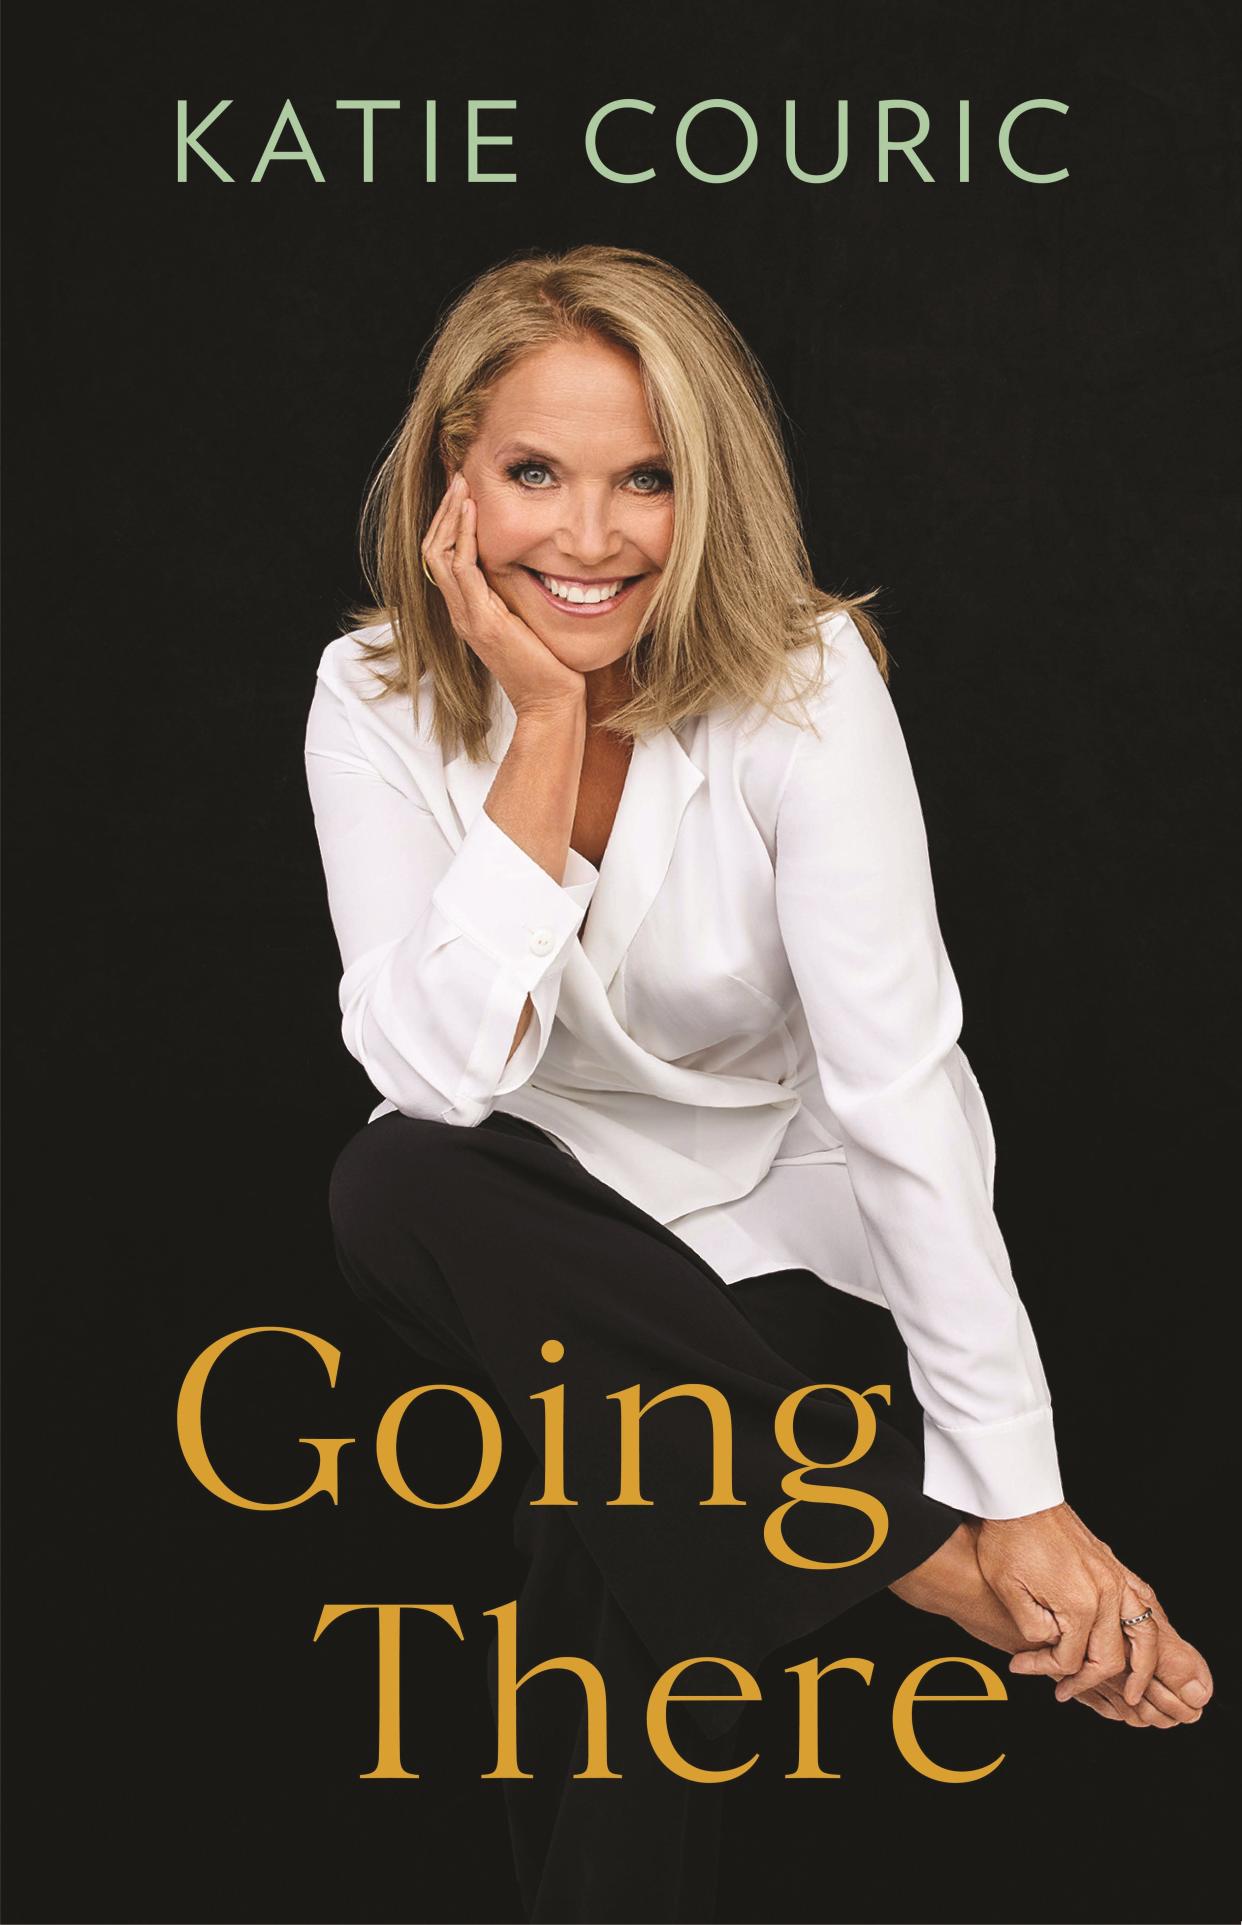 Katie Couric's memoir "Going There" is available Tuesday.